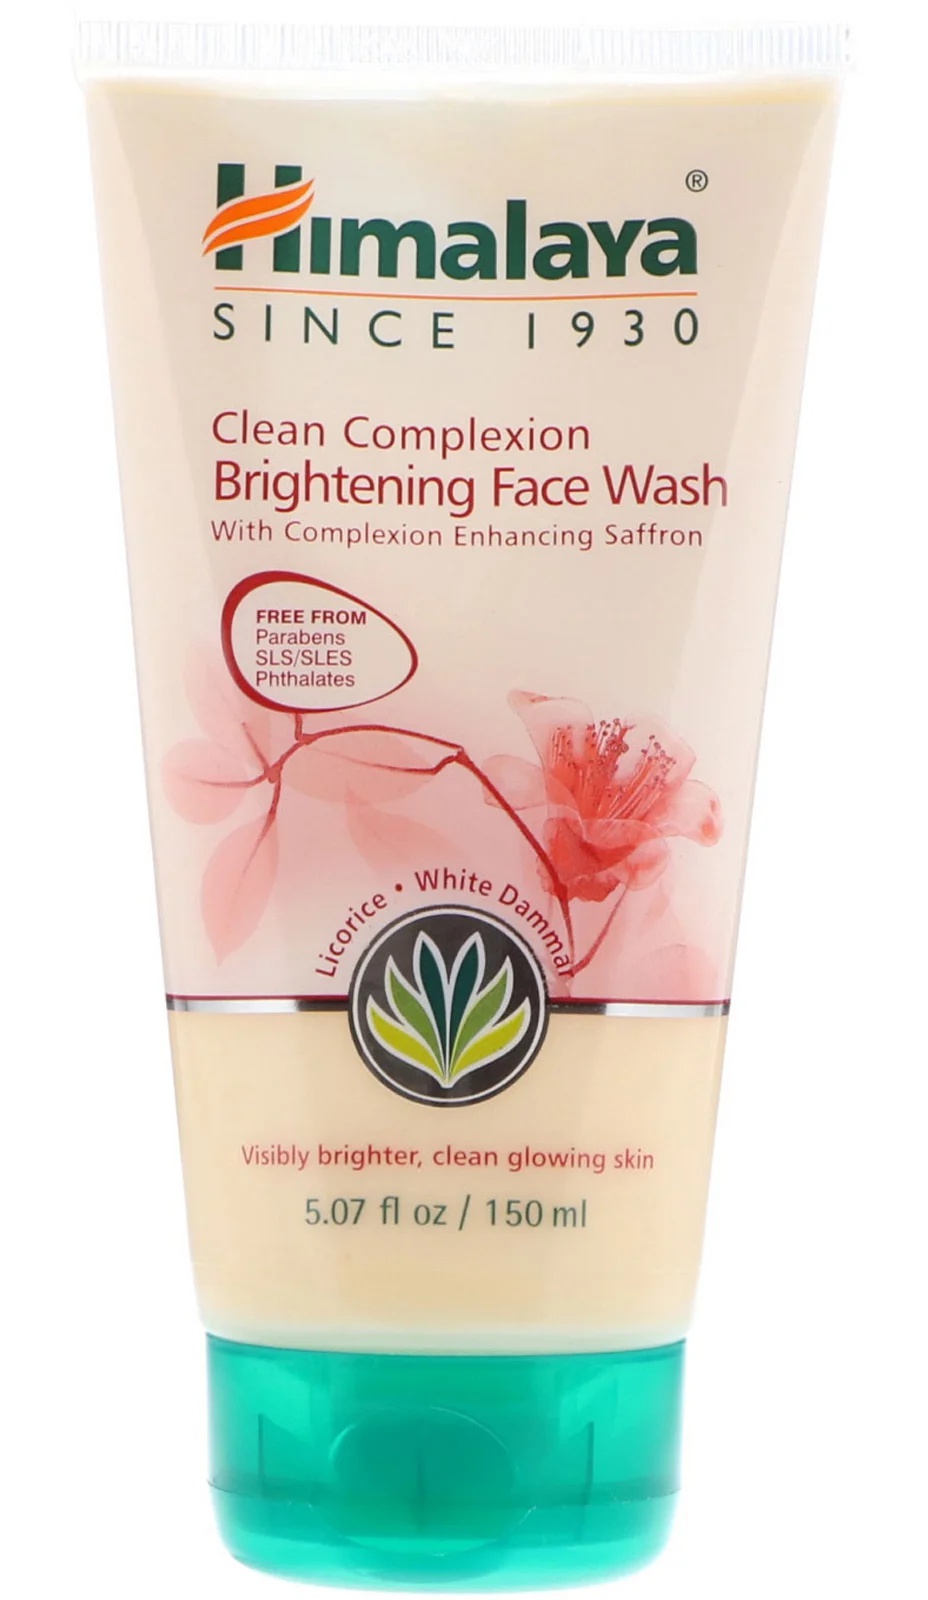 Himalaya Clean Complexion Brightening Face Wash